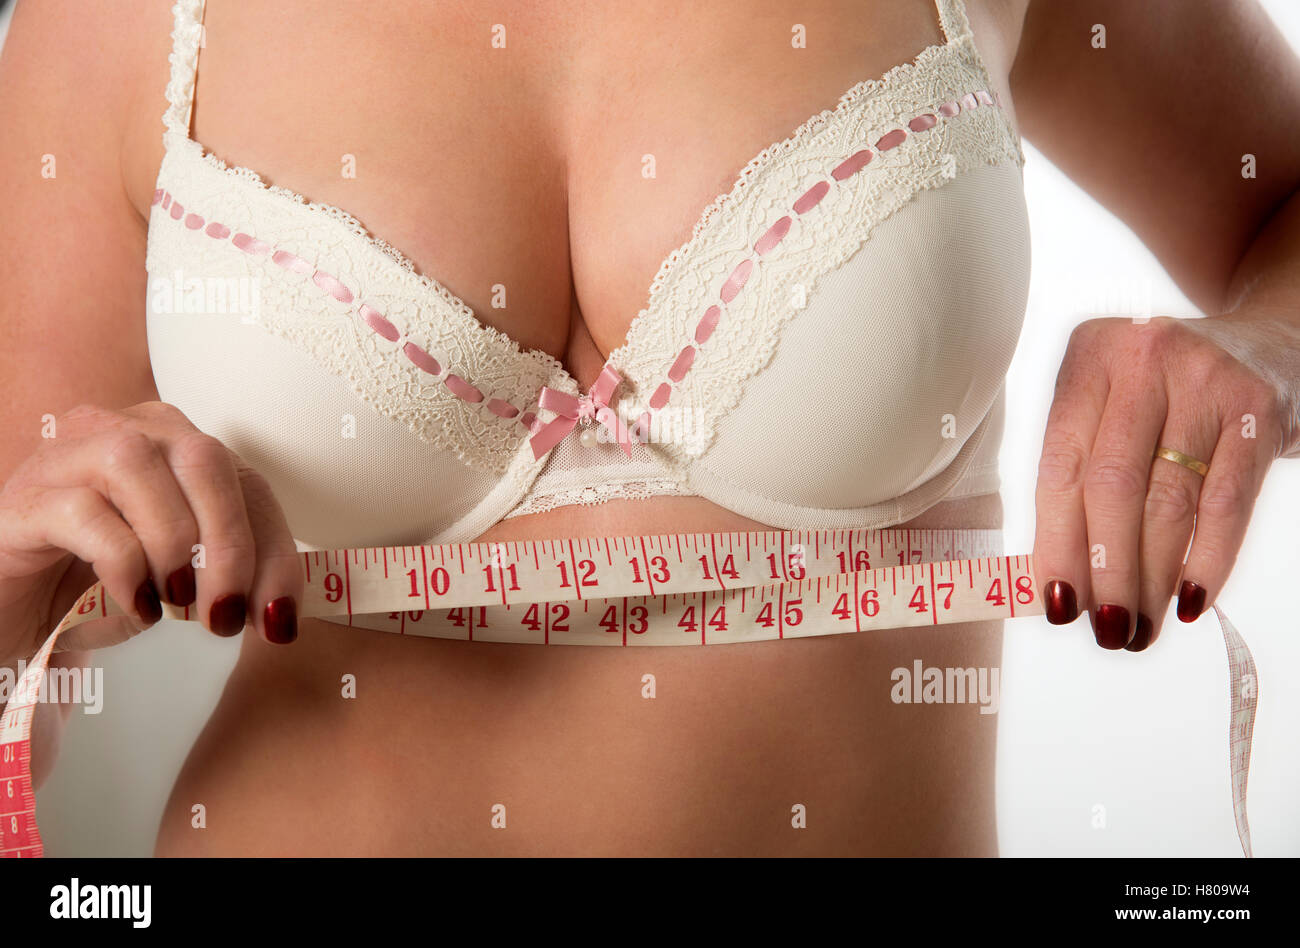 https://c8.alamy.com/comp/H809W4/middle-aged-woman-checking-under-bra-measurement-using-a-tape-measure-H809W4.jpg